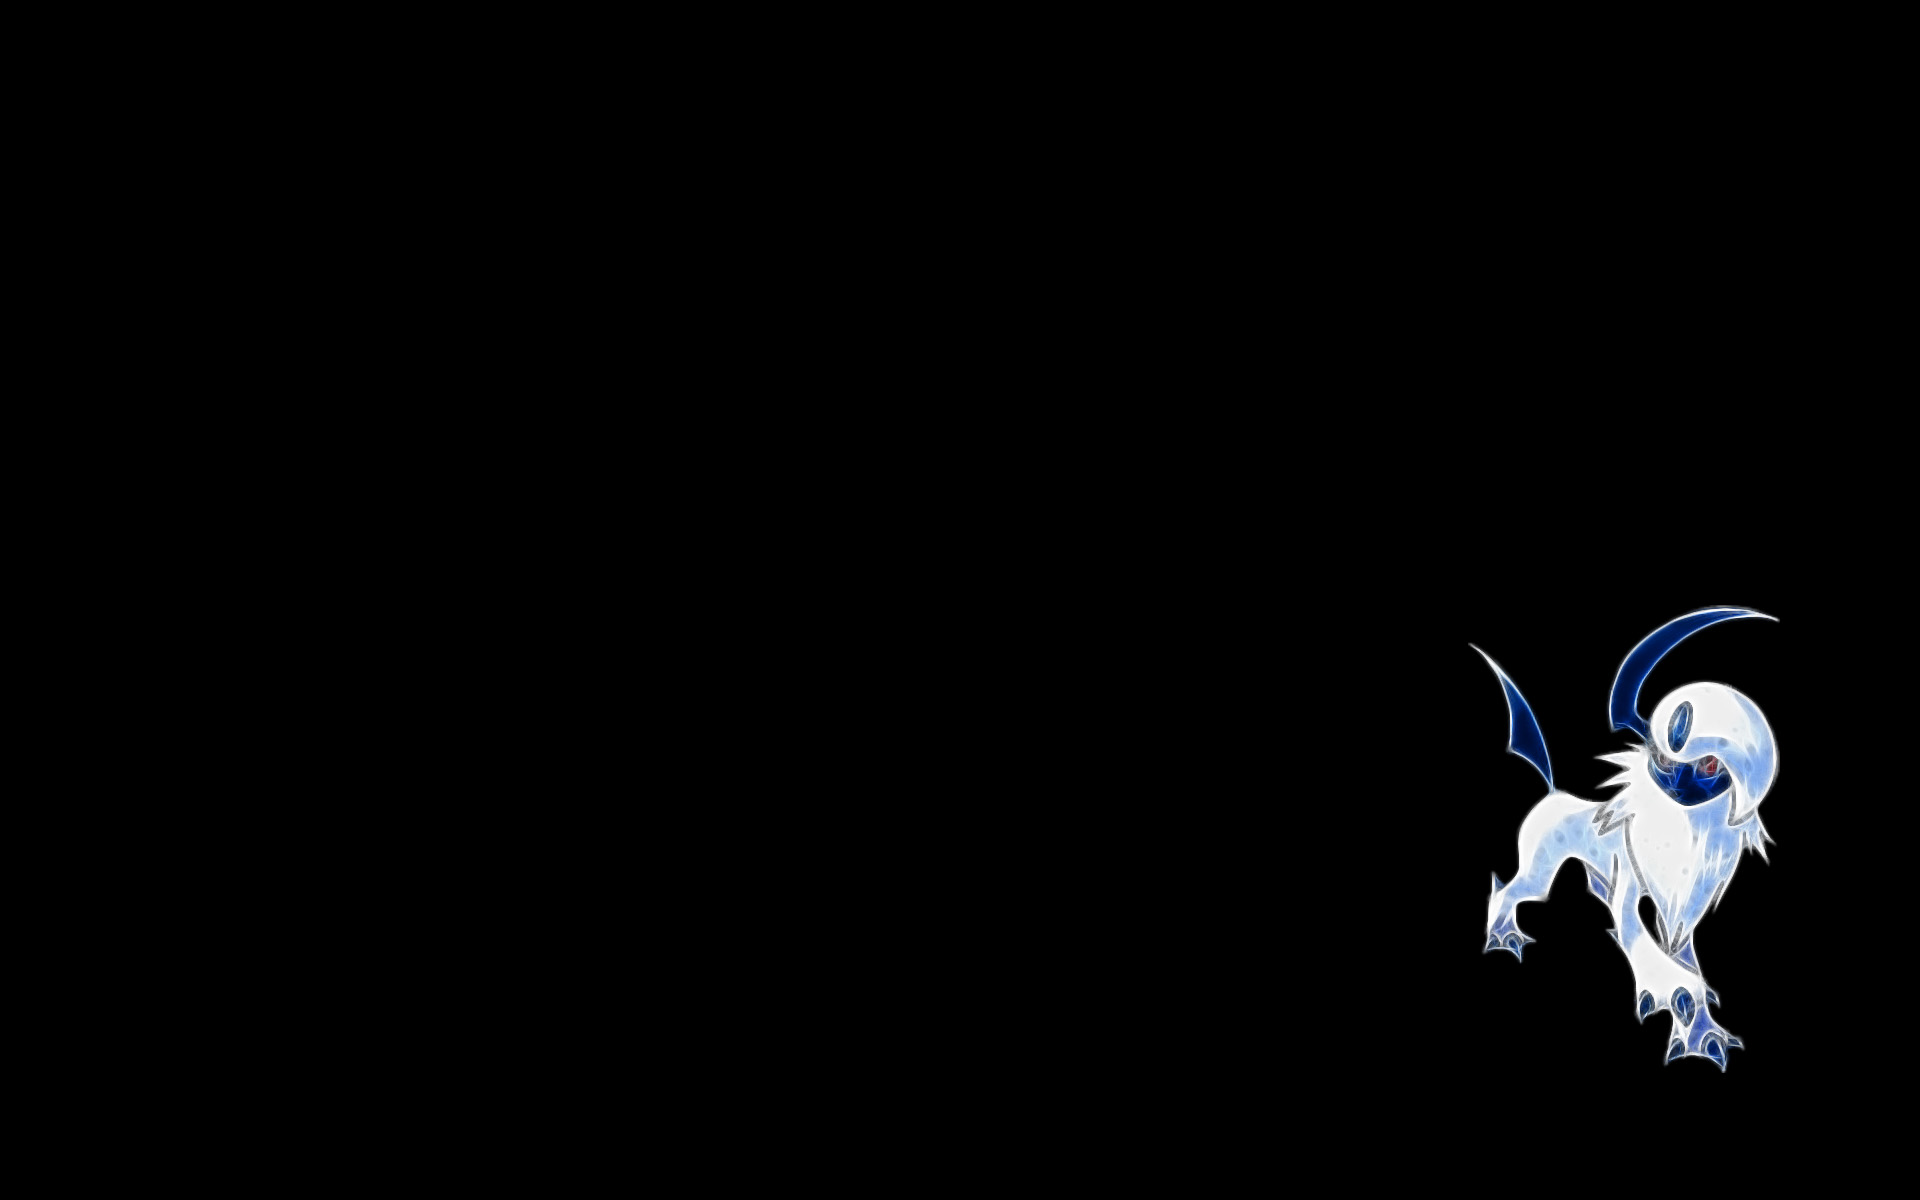 A mesmerizing dark Pokémon, Absol, stands strong in this Anime-inspired desktop wallpaper.